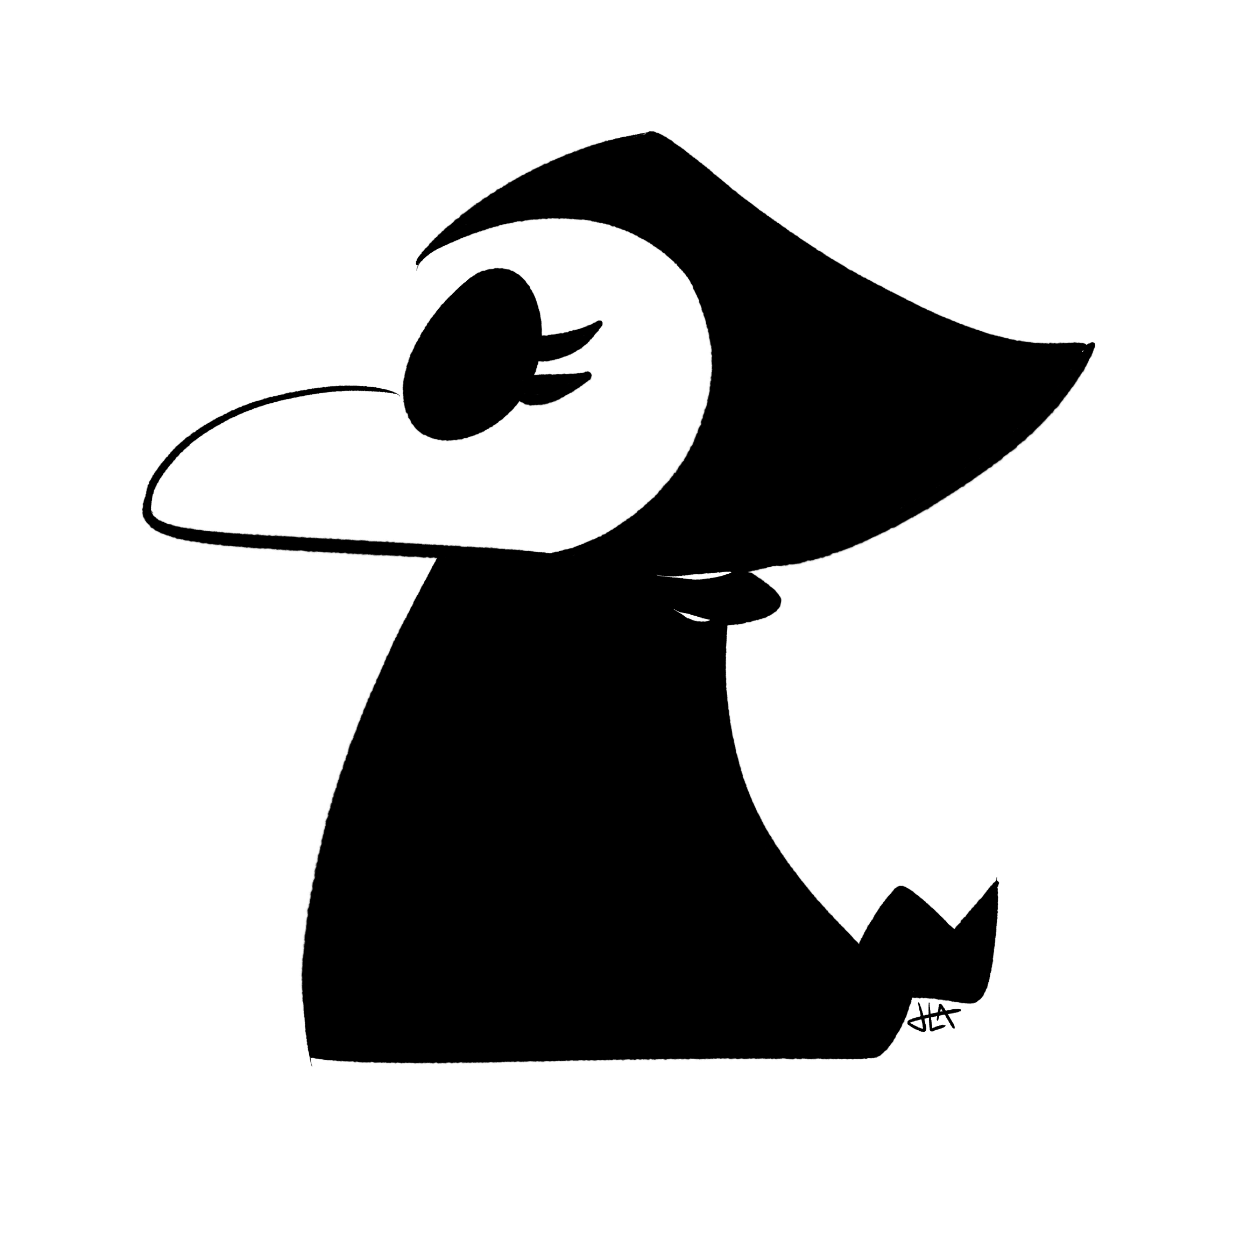 ingrid the plague doctor r34